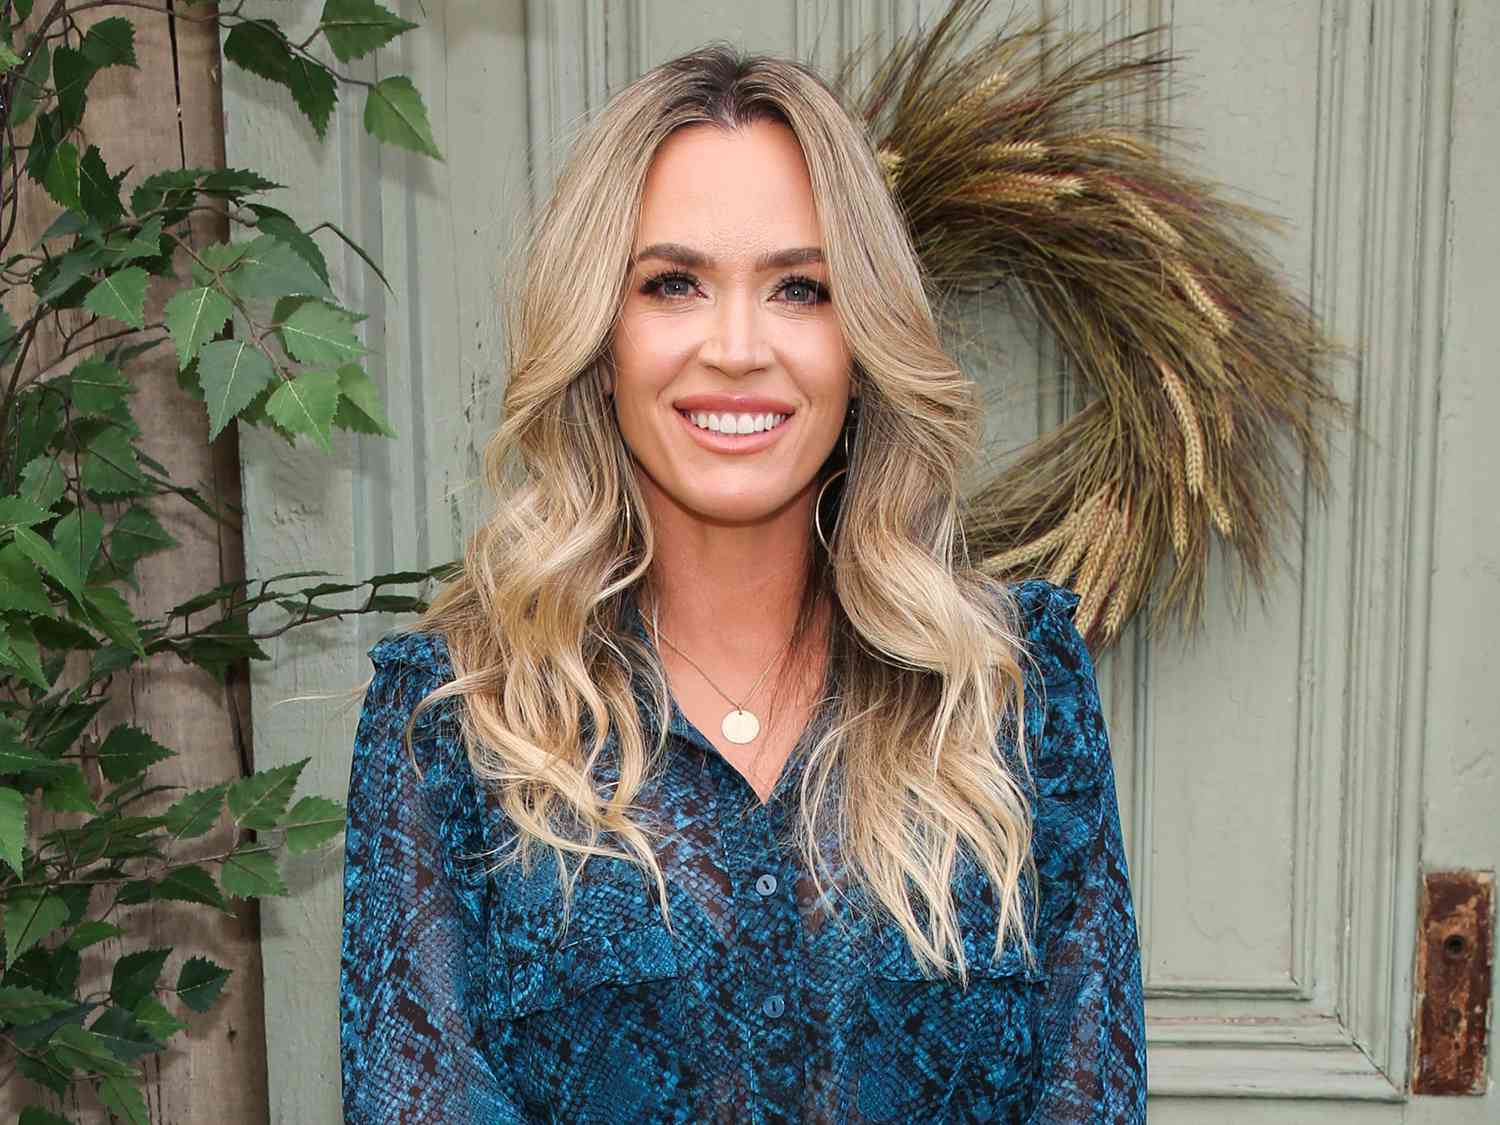 Teddi Mellencamp Arroyave visits Hallmark Channel's "Home & Family" at Universal Studios Hollywood on March 30, 2021 in Universal City, California